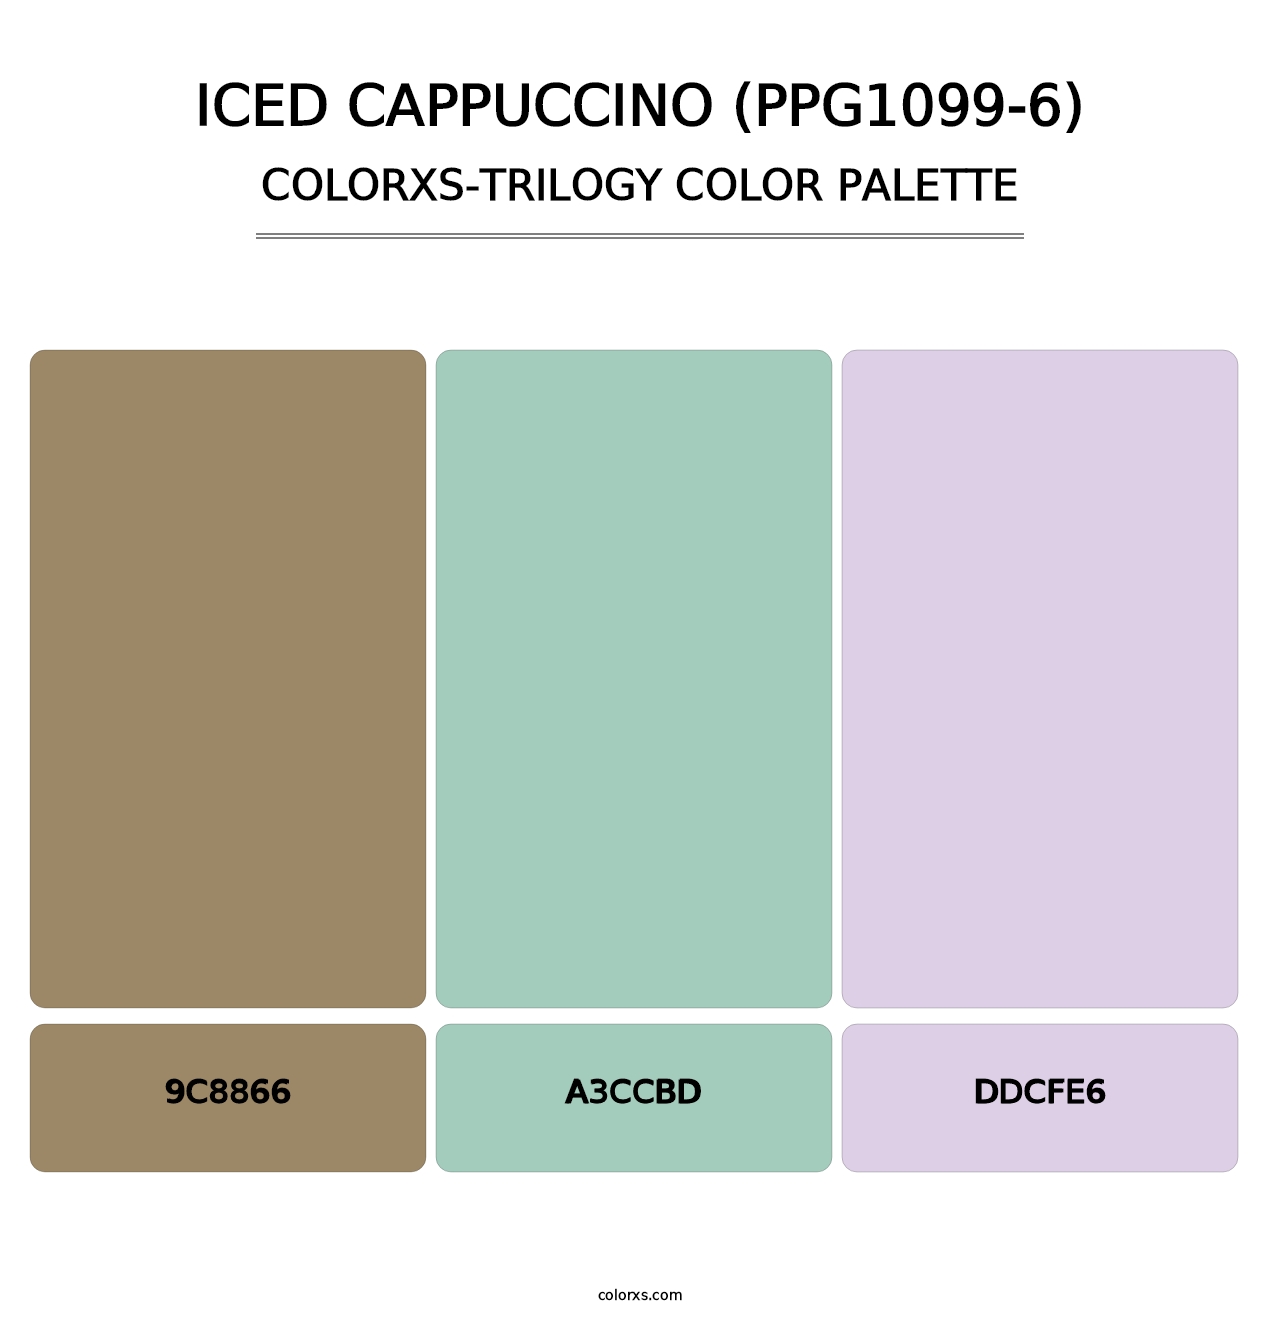 Iced Cappuccino (PPG1099-6) - Colorxs Trilogy Palette